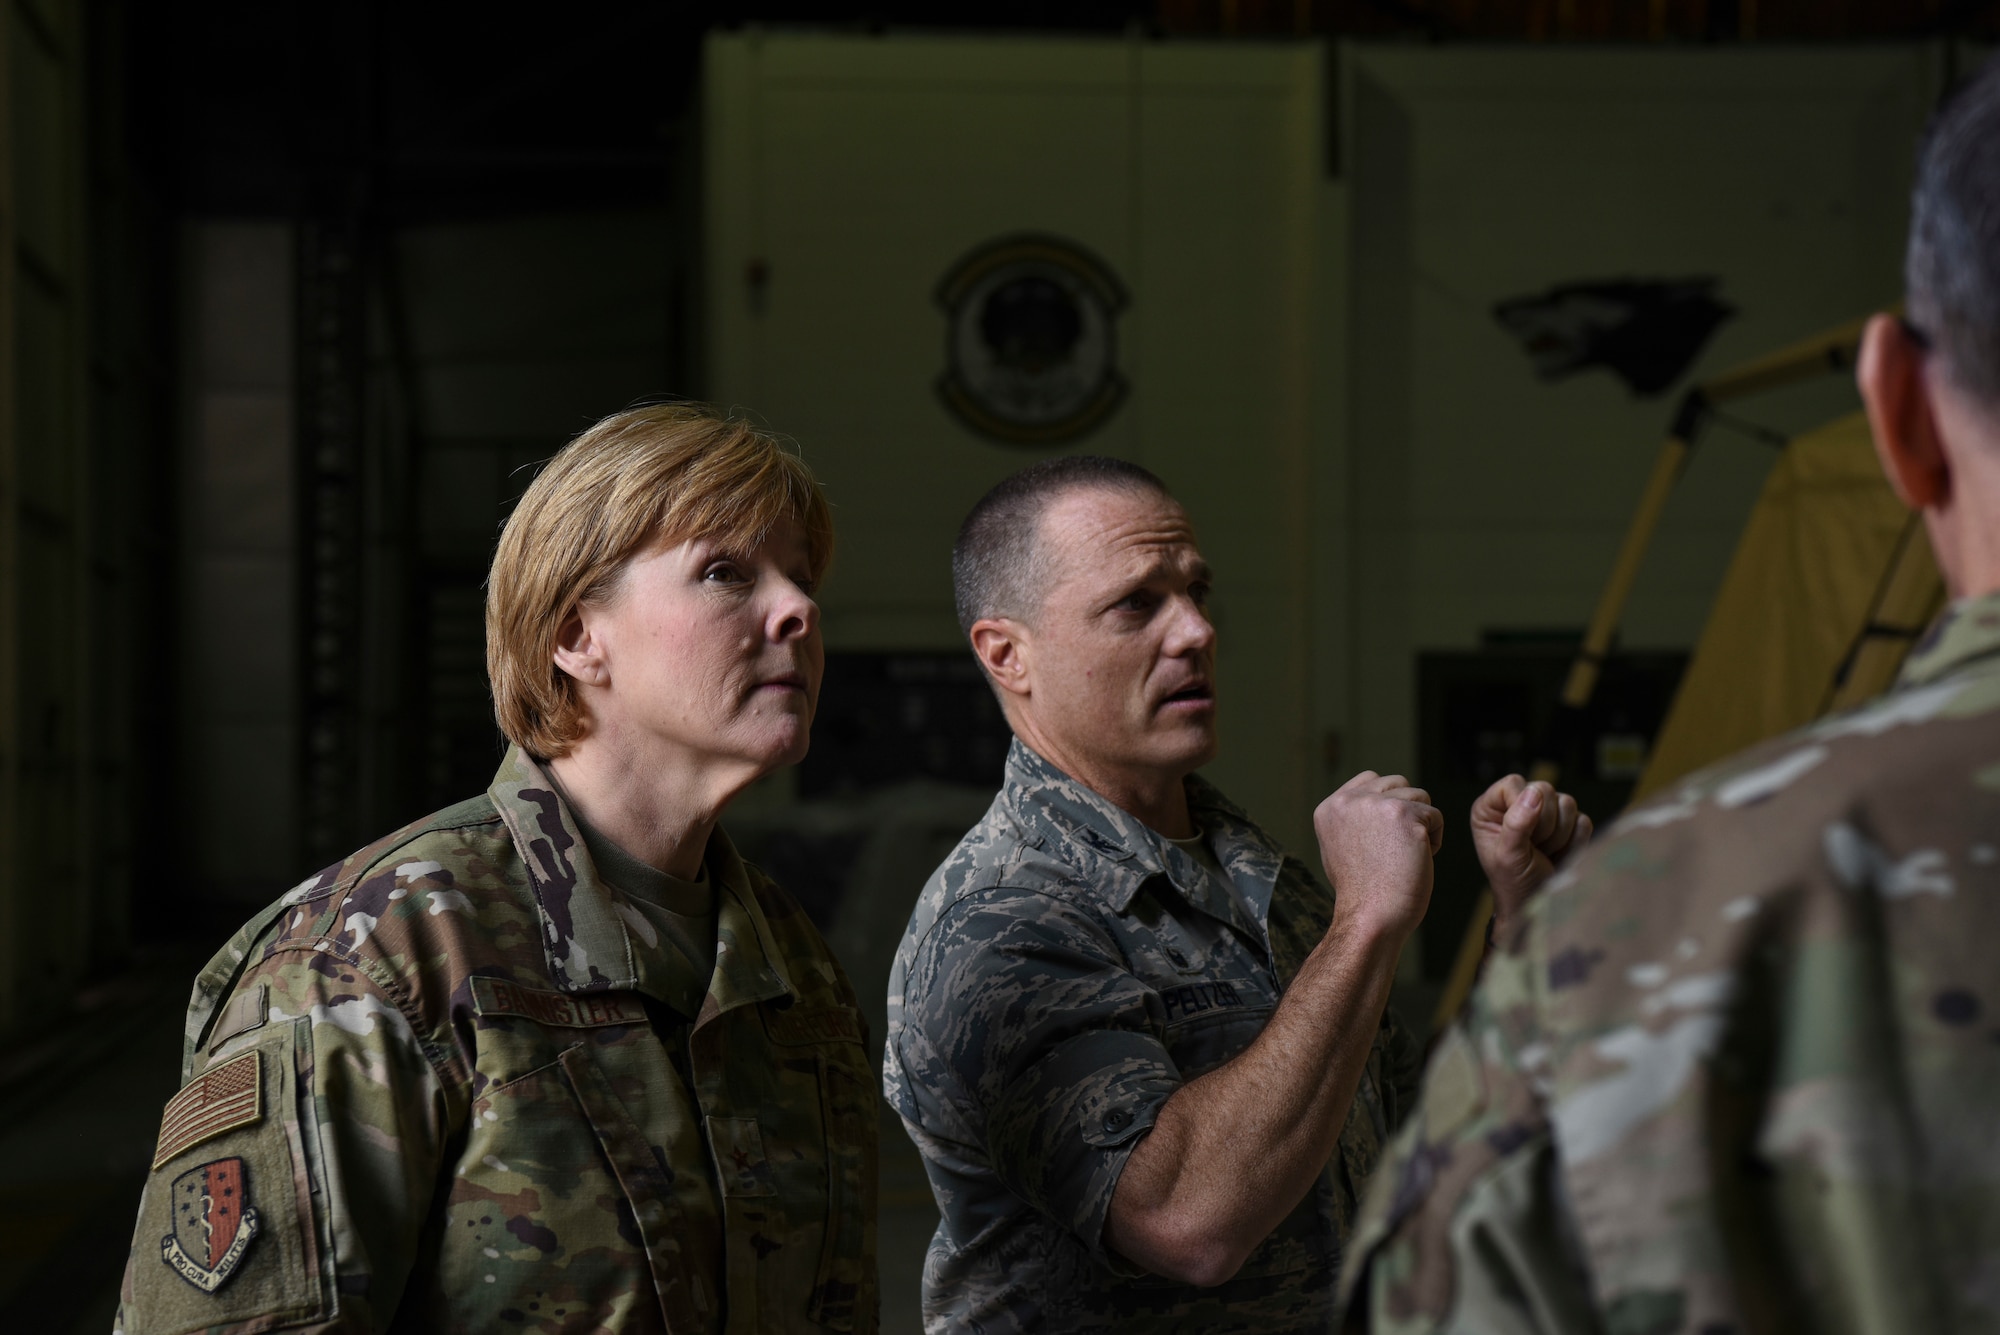 U.S. Air Force Col. Robert Peltzer, 8th Medical Group commander, briefs Brig. Gen. (Dr.) Sharon Bannister, Defense Health Agency education and training deputy assistant director and Assistant Surgeon General for Dental Services, during her visit to Kunsan Air Base, Republic of Korea, Jan. 23, 2019. Gen. Bannister toured the 8th MDG sharing her priorities and learning how the Wolf Pack ensures force readiness. (U.S. Air Force Photo by Senior Airman Savannah Waters)